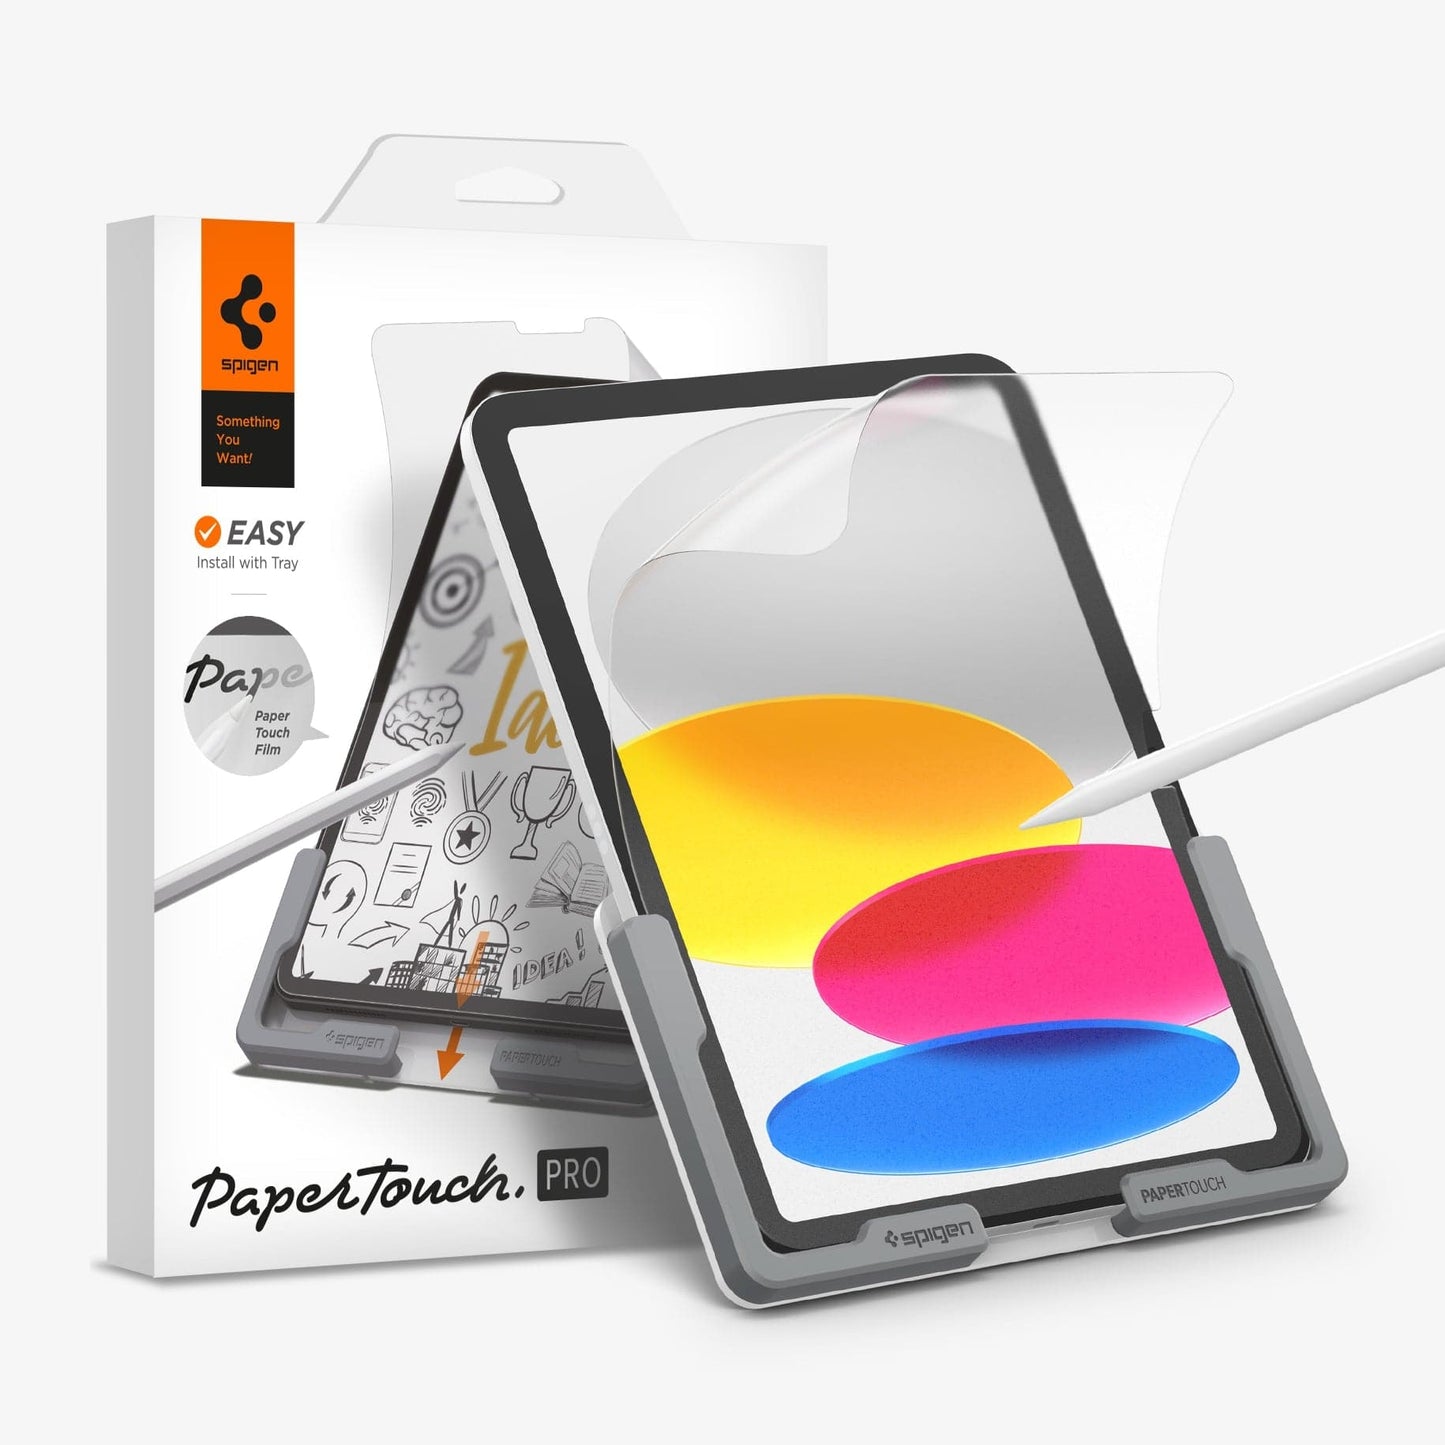 AFL05537 - iPad 10.9" Screen Protector Paper Touch Pro showing the device, screen protector and packaging with pencil in front of screen